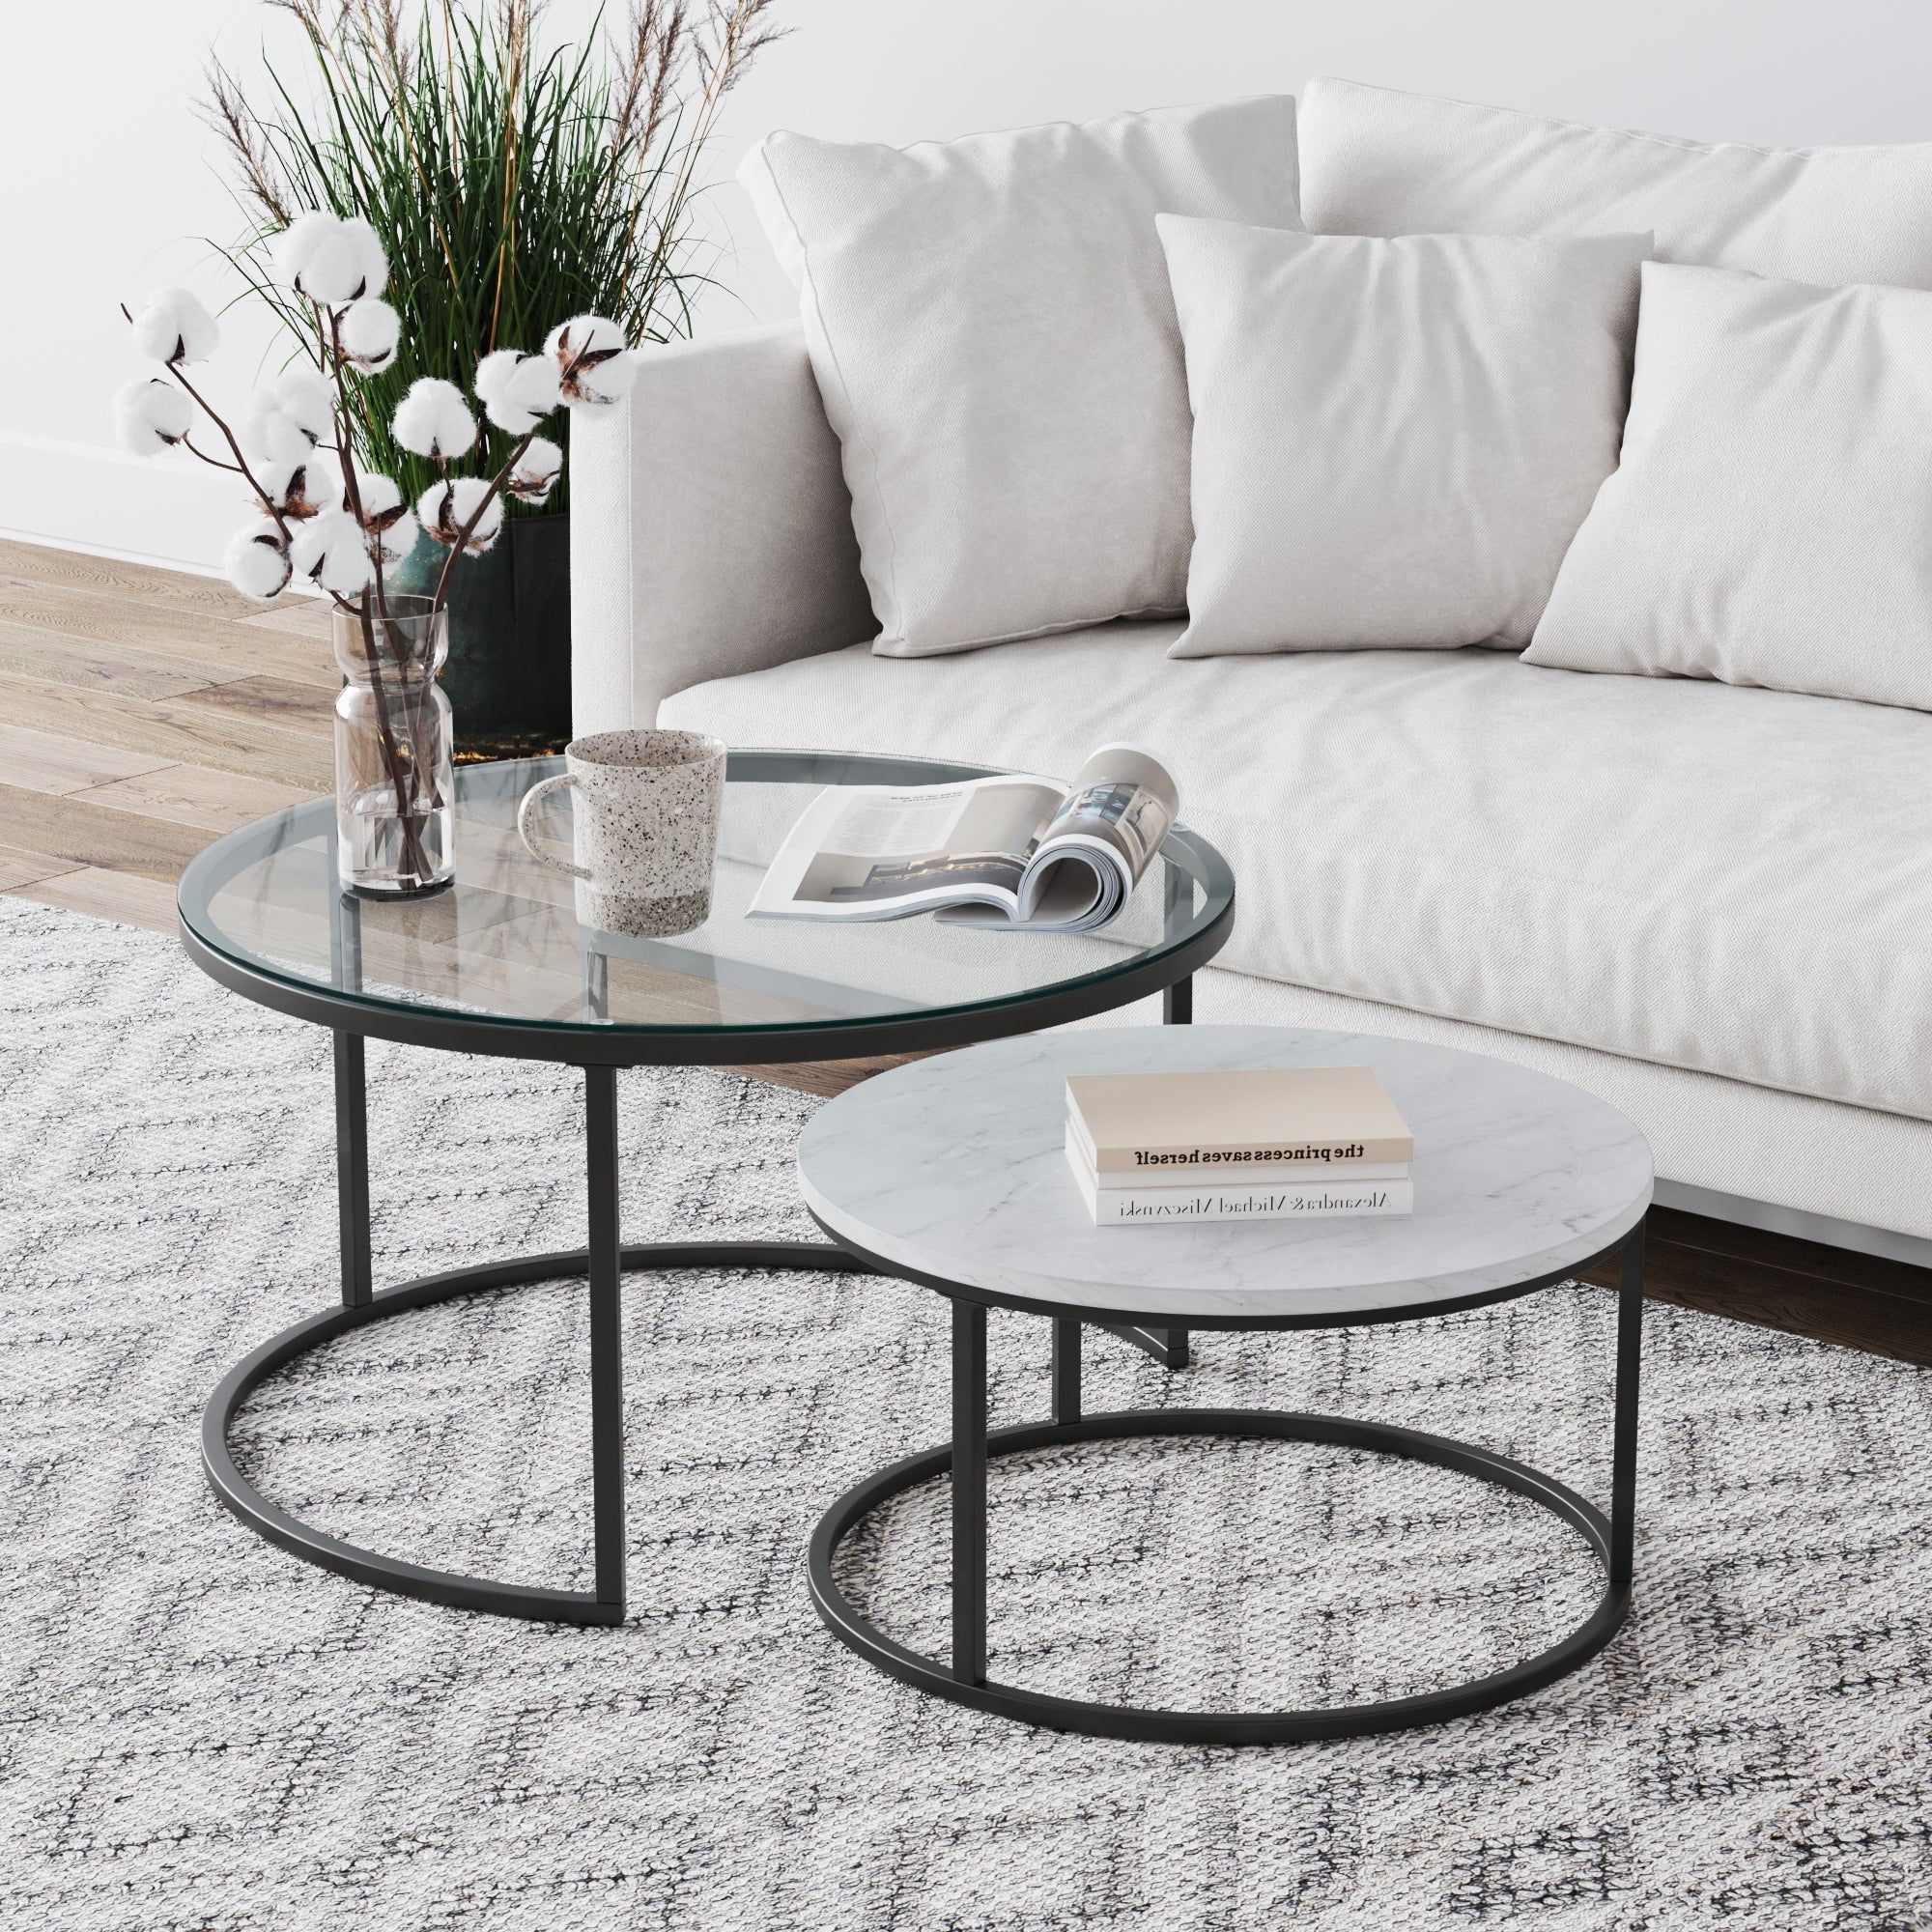 Newest Nathan James Stella Round Nesting Coffee Table Set Of 2 Glass, Marble  Finish And Metal Frame, Marble/glass/black – Walmart With Nesting Coffee Tables (View 10 of 10)